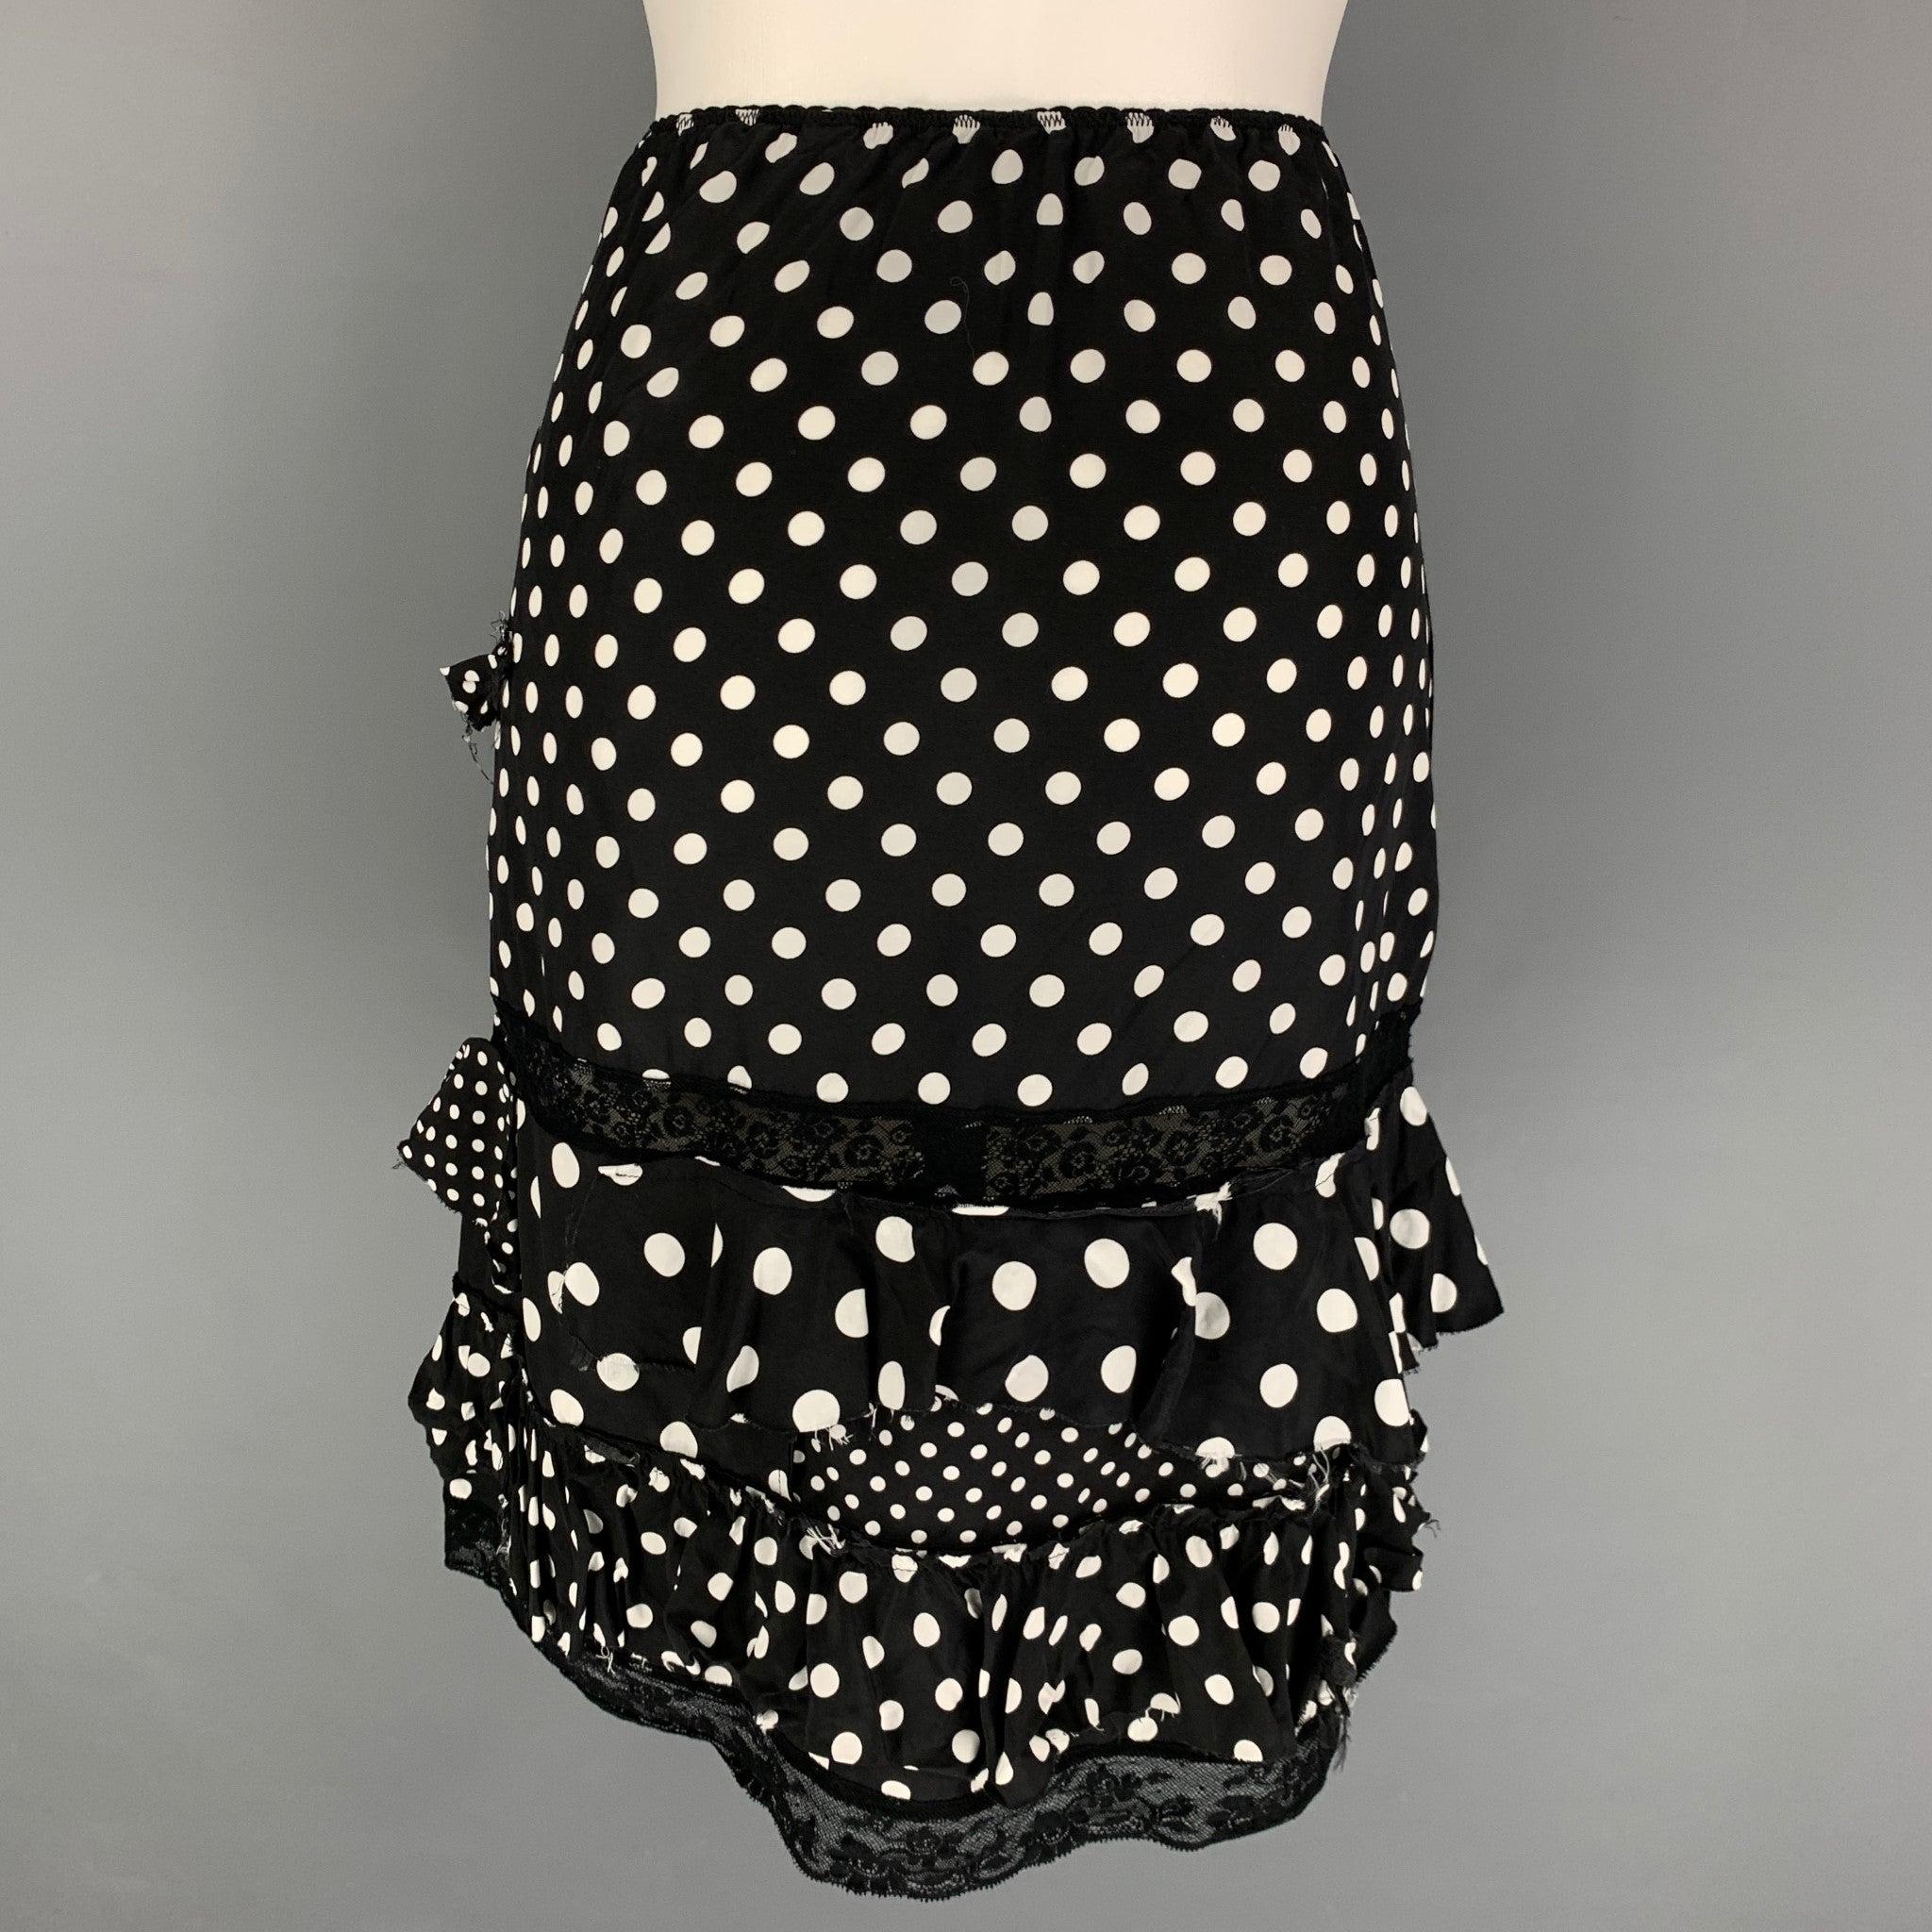 MARC by MARC JACOBS Size 0 Black White Viscose Polka Dot Ruffle Skirt In Good Condition For Sale In San Francisco, CA